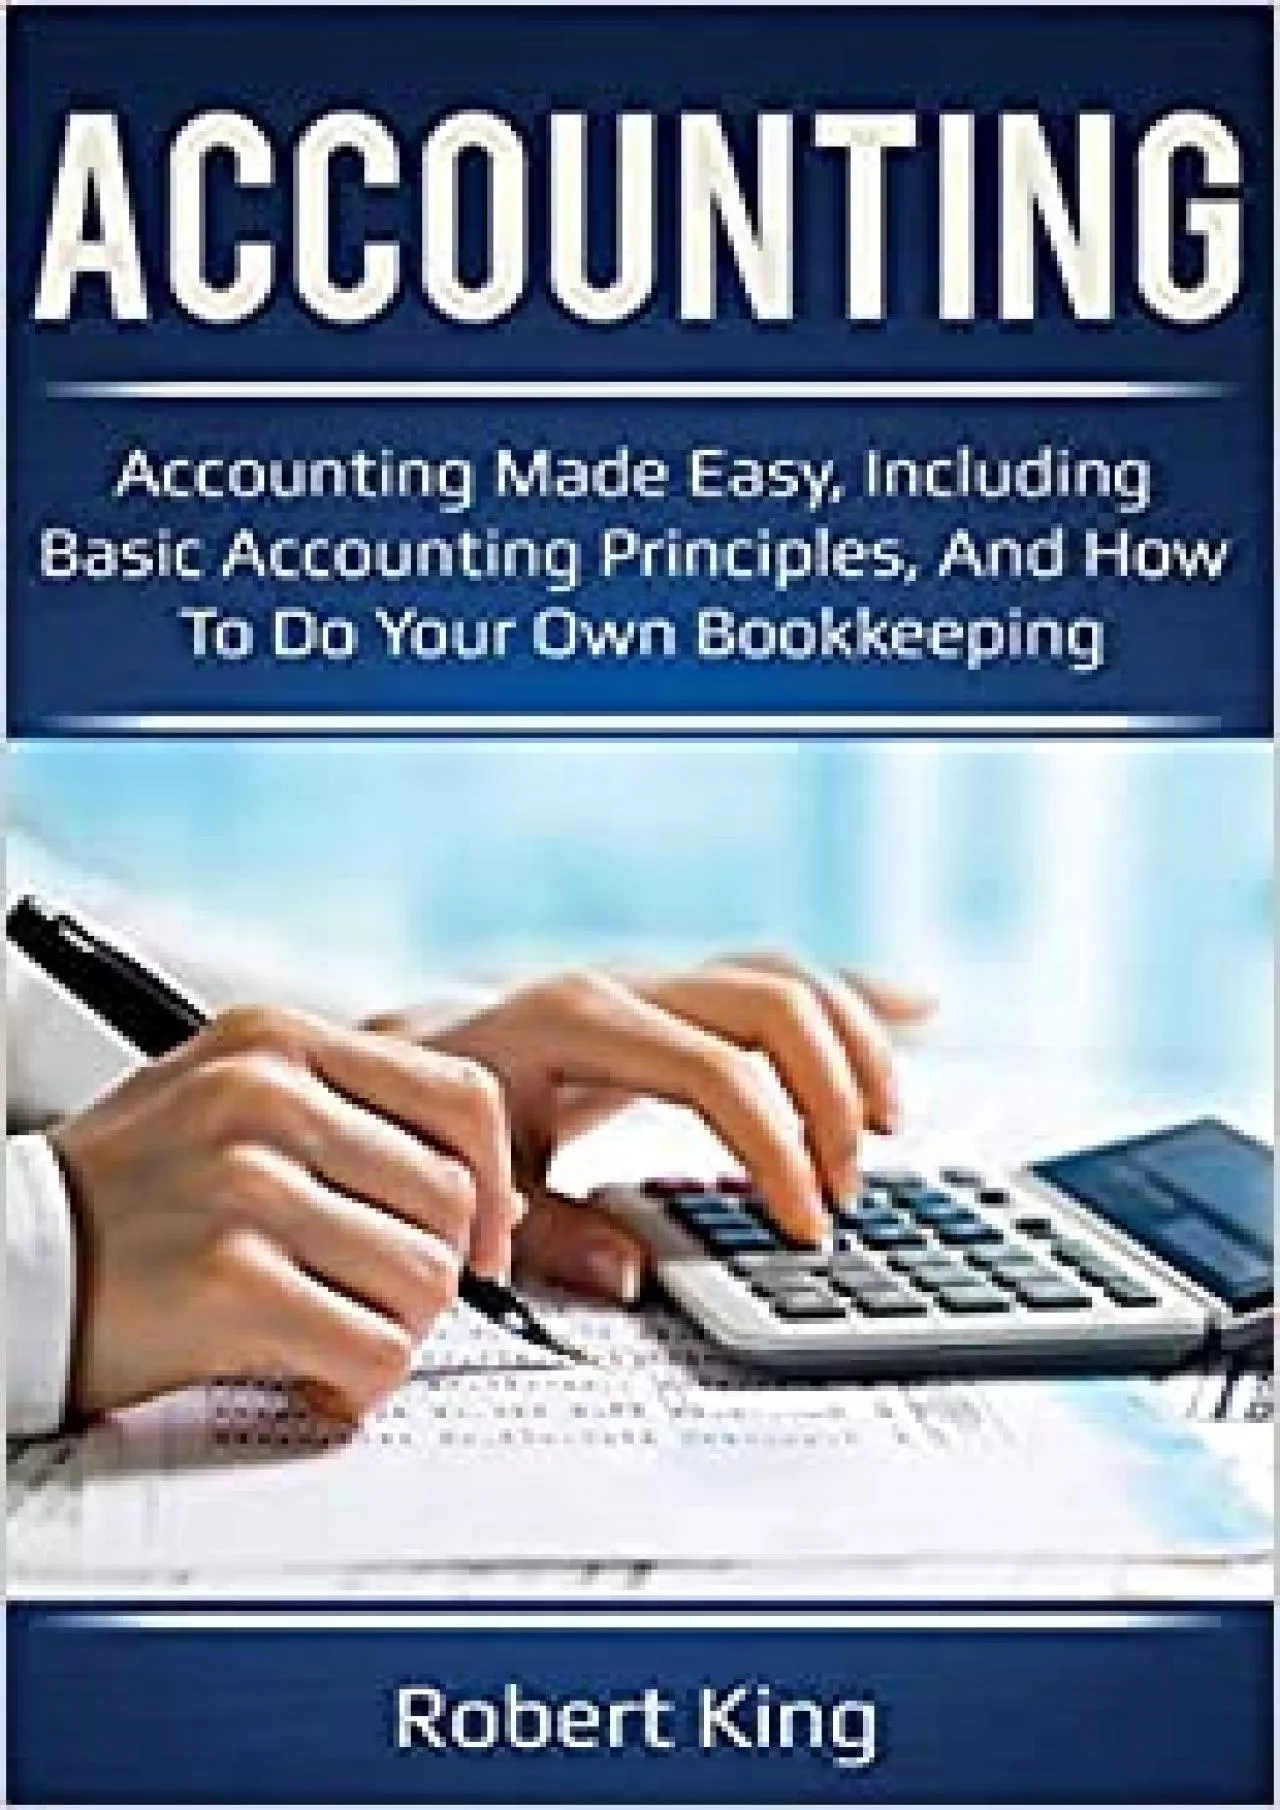 Accounting: Accounting made easy including basic accounting principles and how to do your